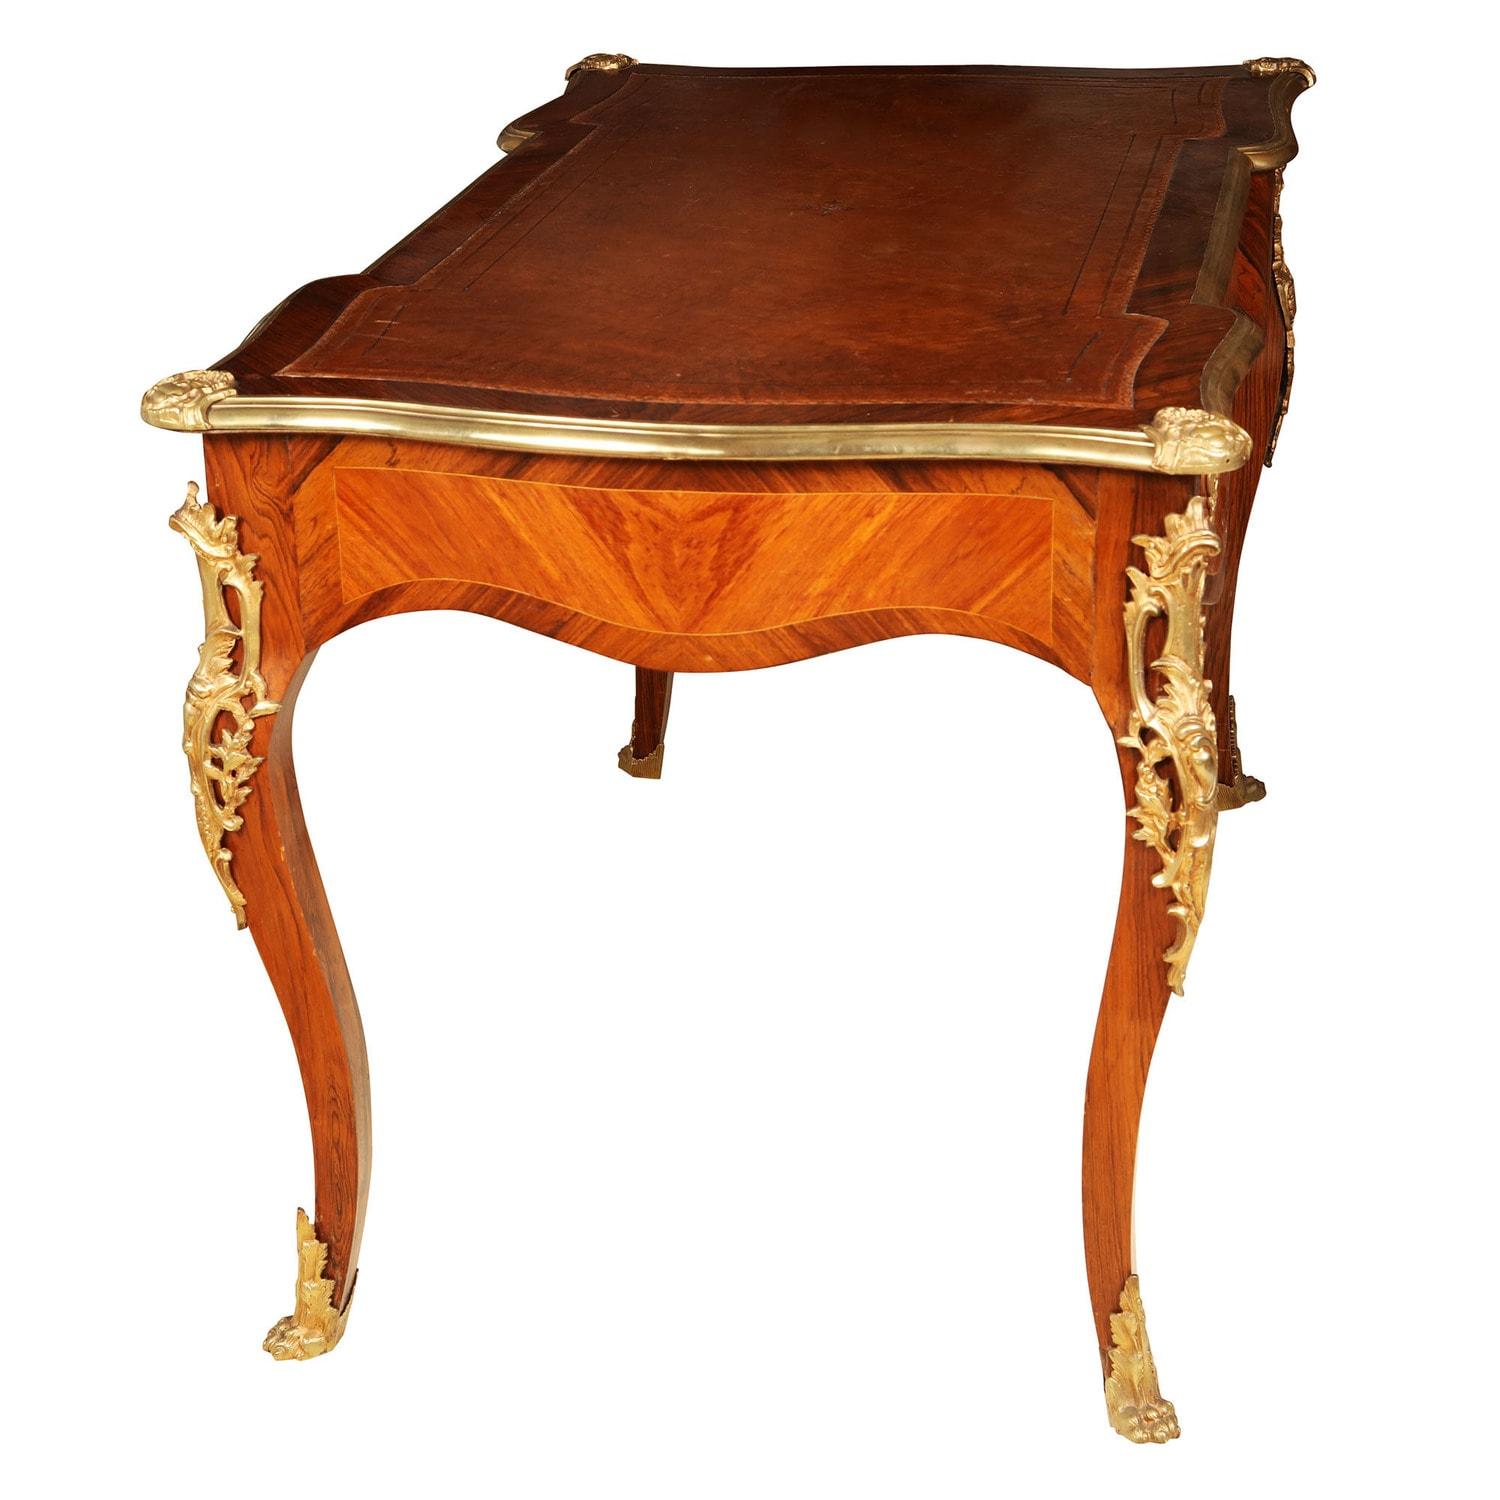 A late 19th century Napoleon III bureau plat desk in the Louis XV style, the shaped top with bronze molding above three drawers and supported on cabriole legs with foliate gilt mounts and hairy paw feet.
France, circa 1880
Measures: Height 78cm